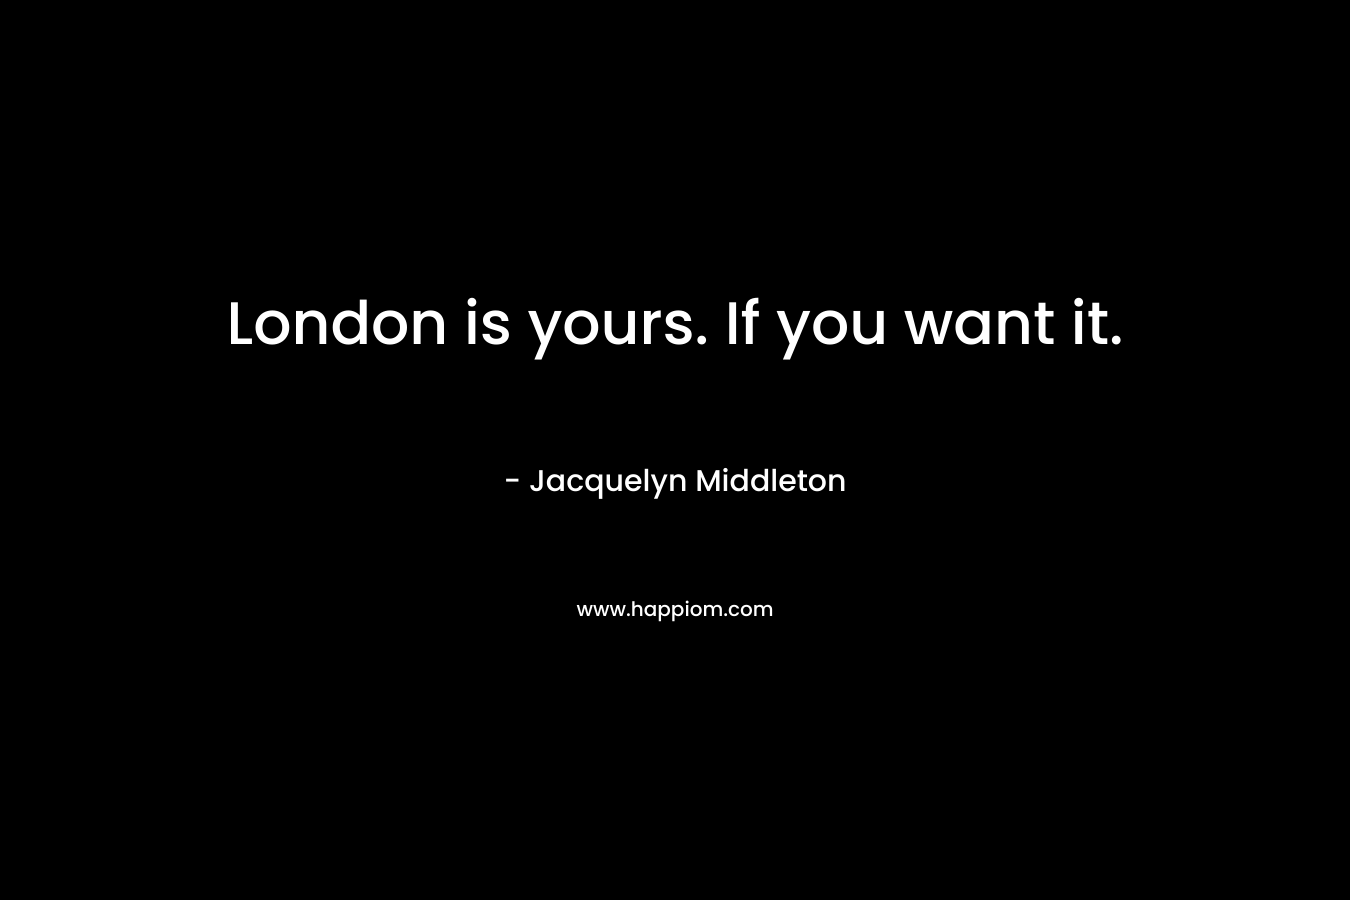 London is yours. If you want it.